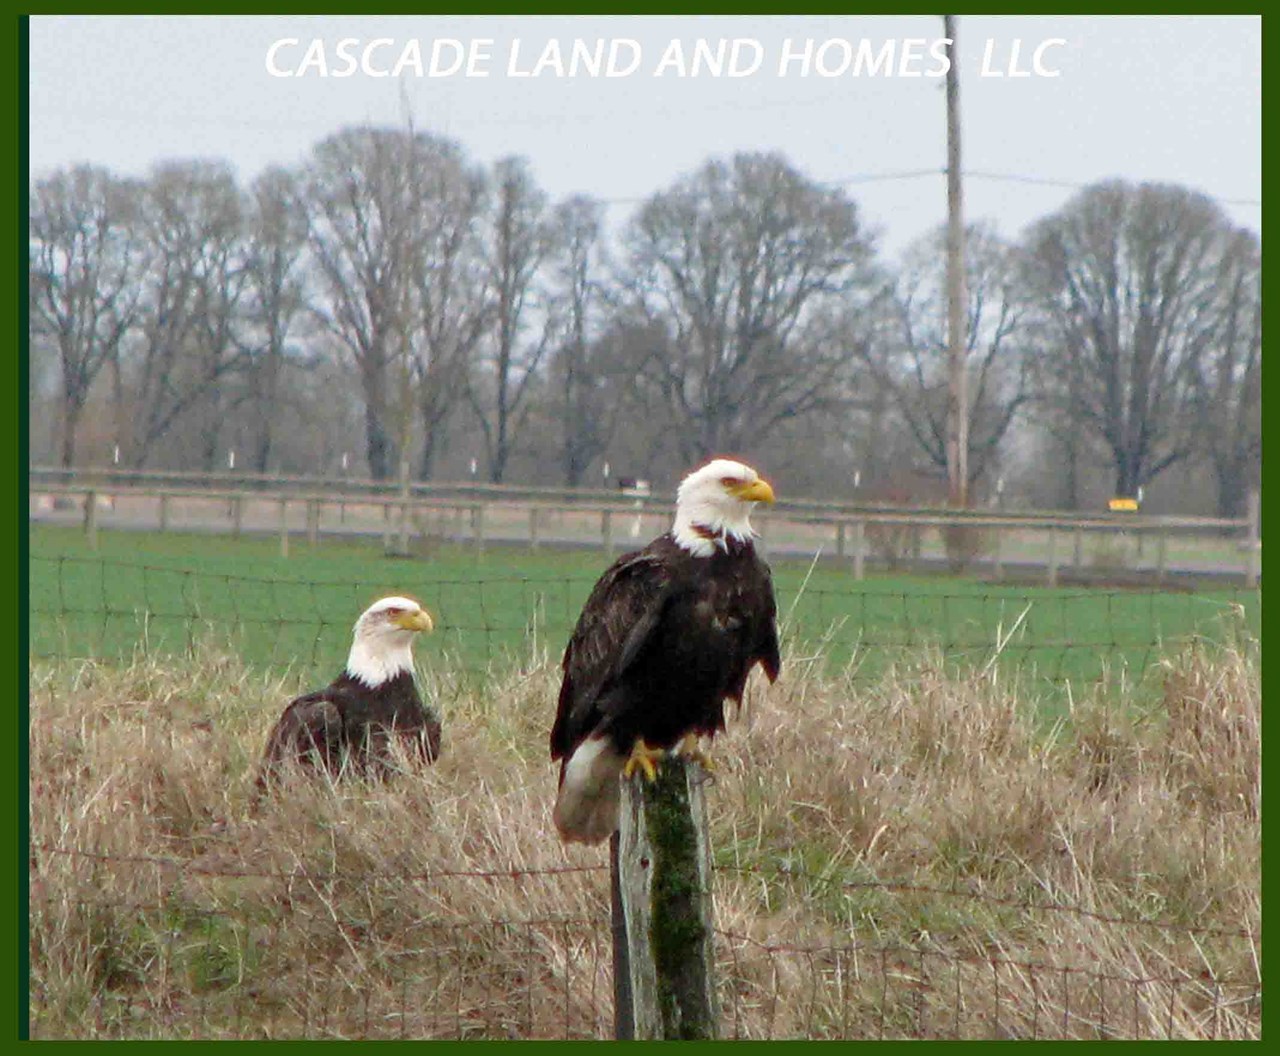 the area is known for being on the pacific flyway for migratory birds. over 400 species of birds make their way through the area, including bald eagles! the klamath basin has the largest congregation of wintering bald eagles in the lower 48 states! you can also see sandhill cranes, geese, ducks, songbirds, and pelicans!